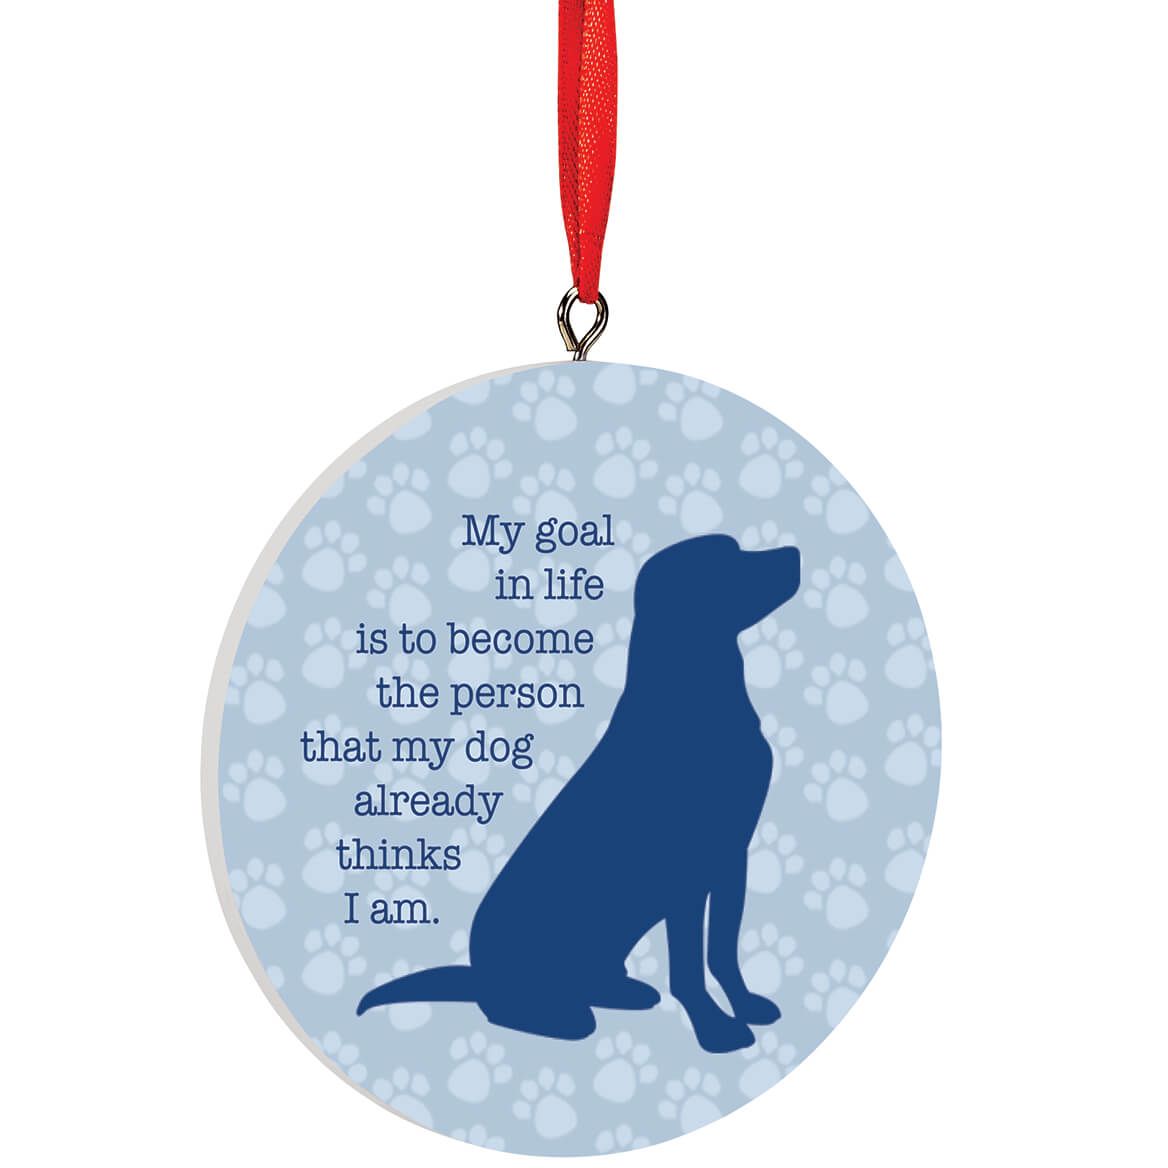 Personalized Dog Life Goals Ornament + '-' + 372730